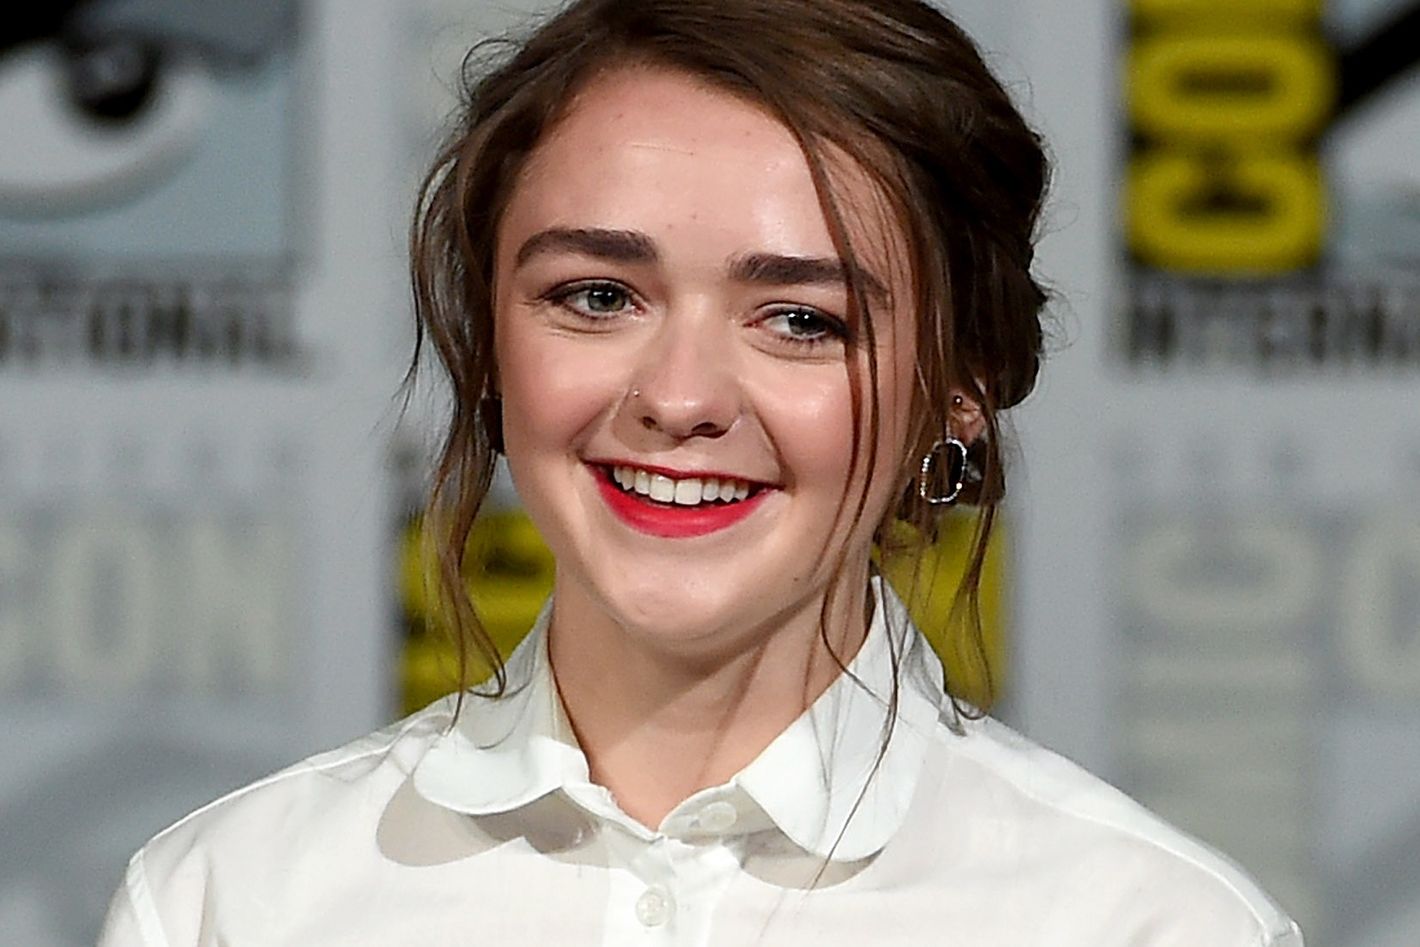 Game of Thrones actress Maisie Williams has an idea for Fortnite’s weapon t...